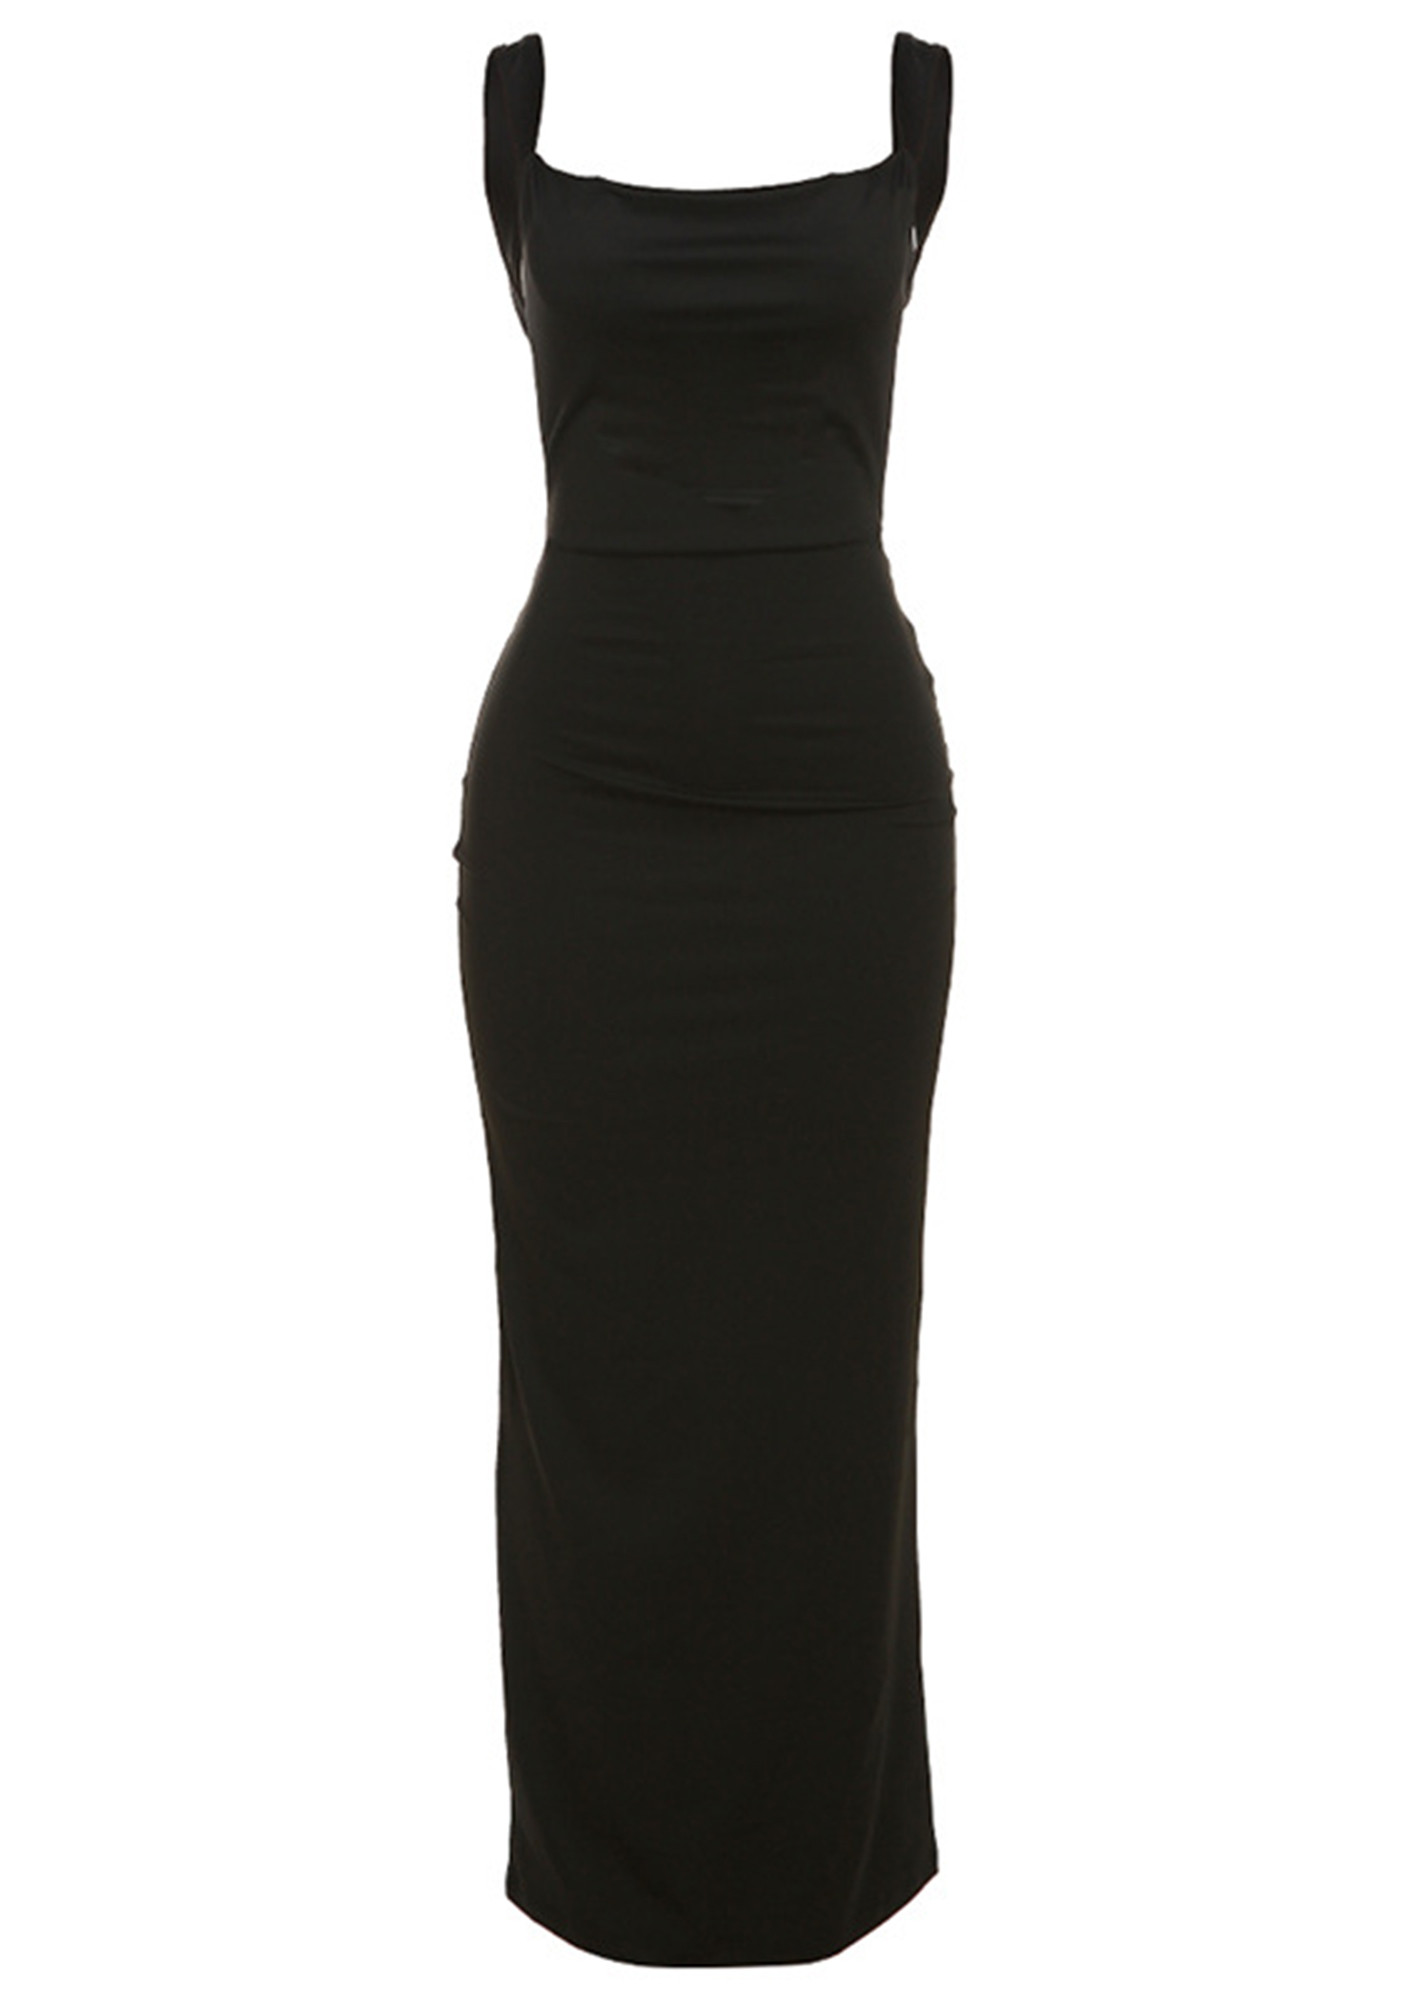 Buy BLACK CUT-OUT FRONT BODYCON COCKTAIL DRESS for Women Online in India